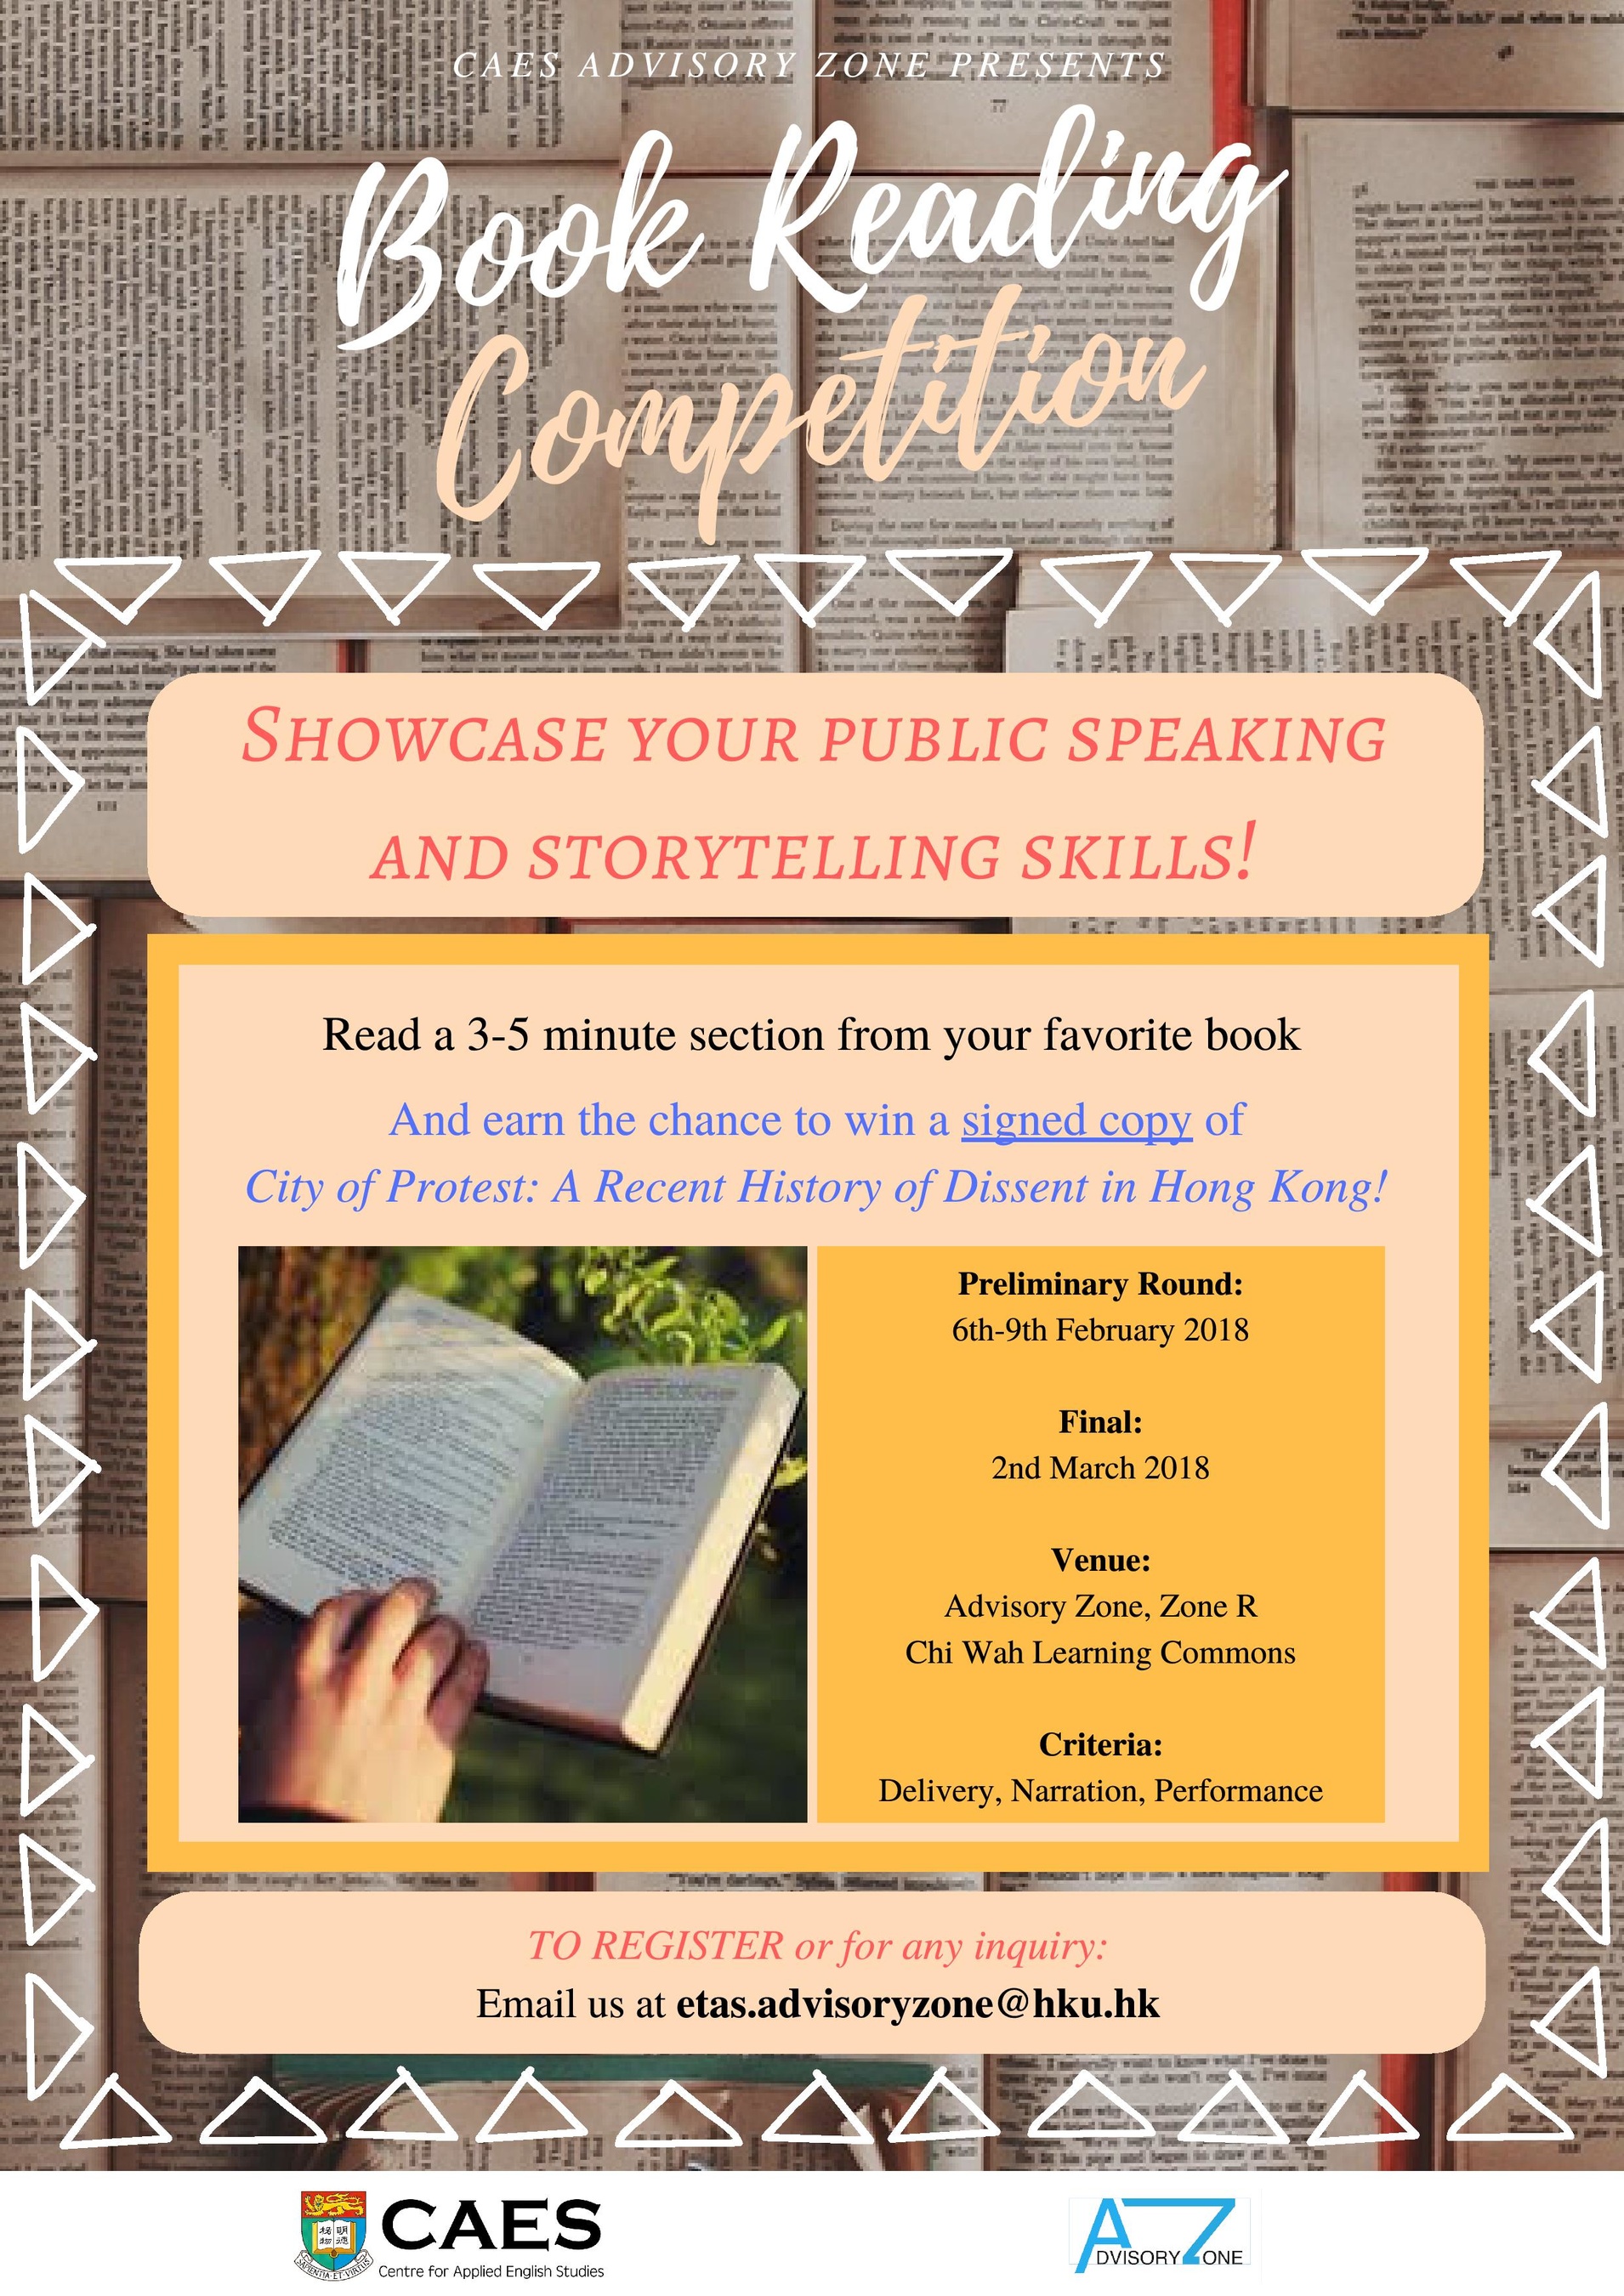 Book Reading Competition